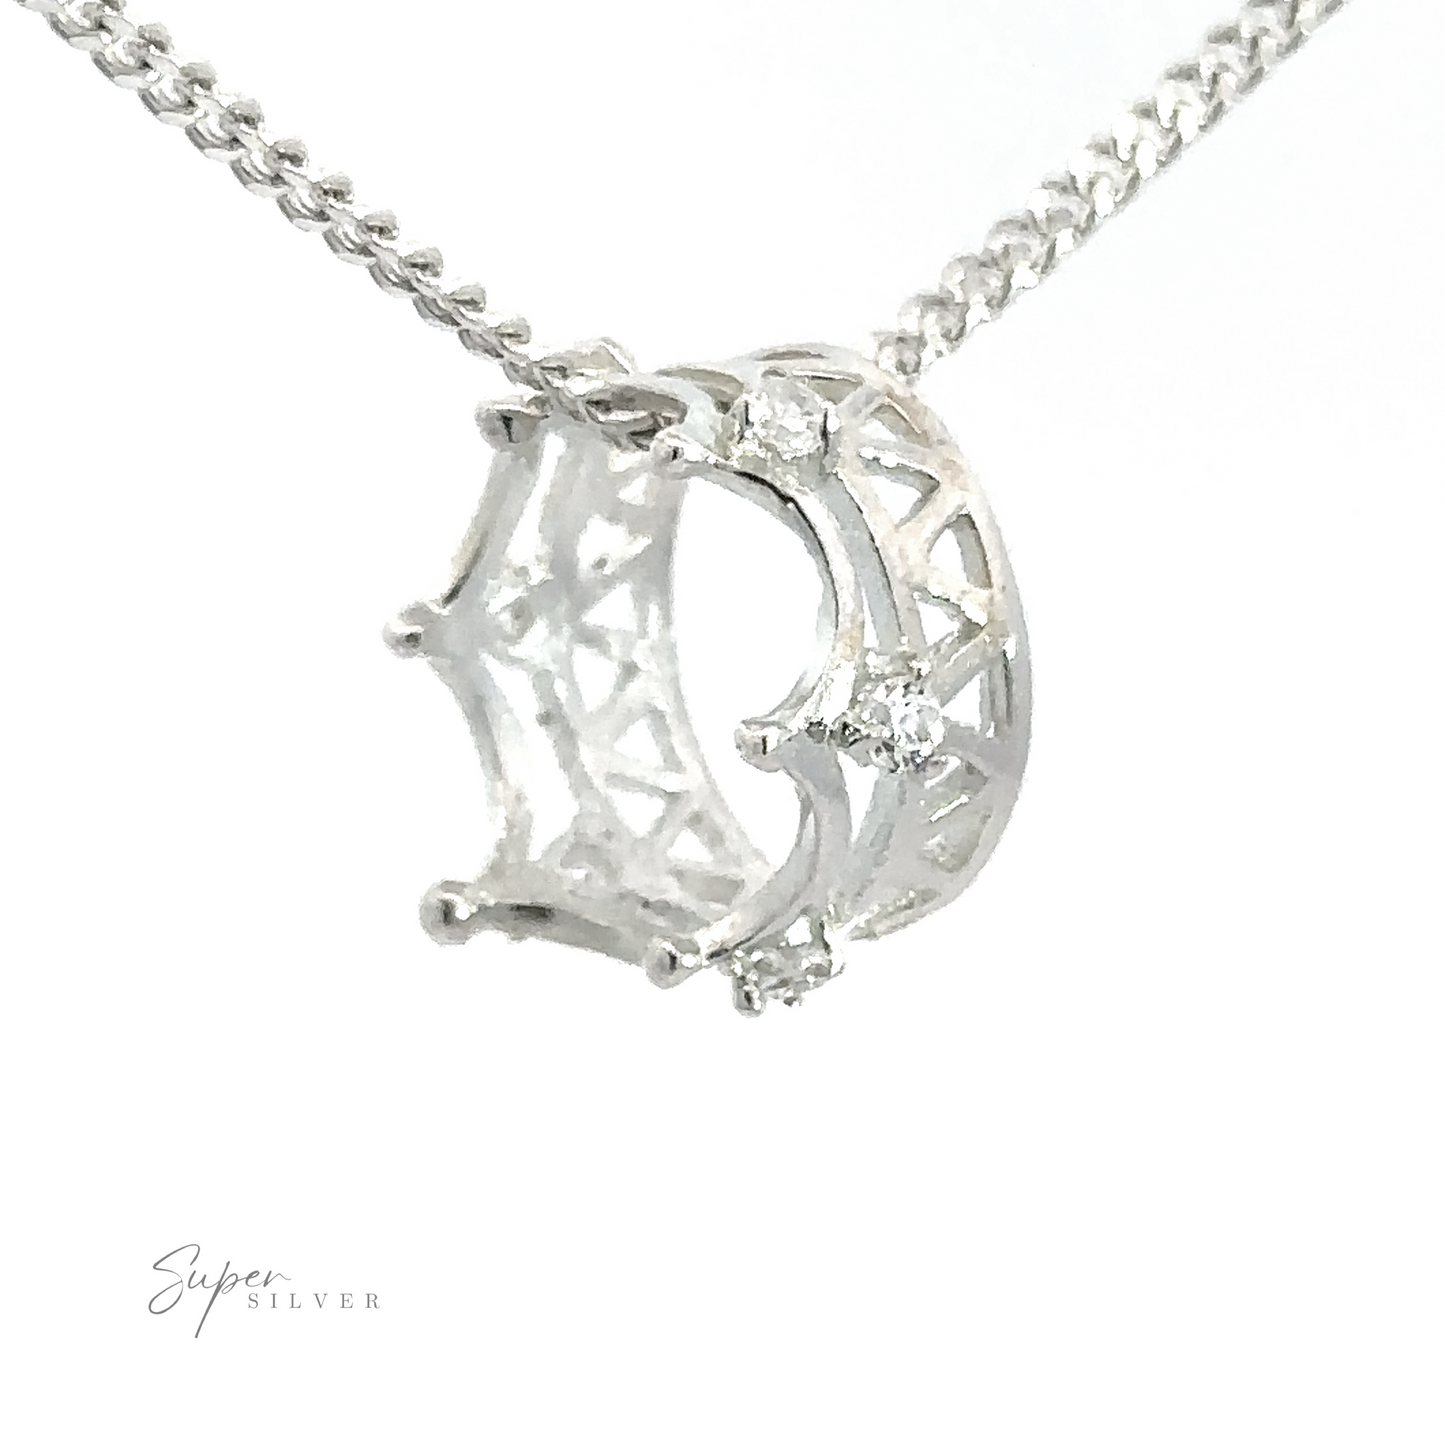 
                  
                    A close-up image of a Cubic Zirconia Crown Pendant on a silver chain. The pendant features a lattice design adorned with small cubic zirconia crystals. The logo "Super Silver" is visible in the bottom left corner.
                  
                